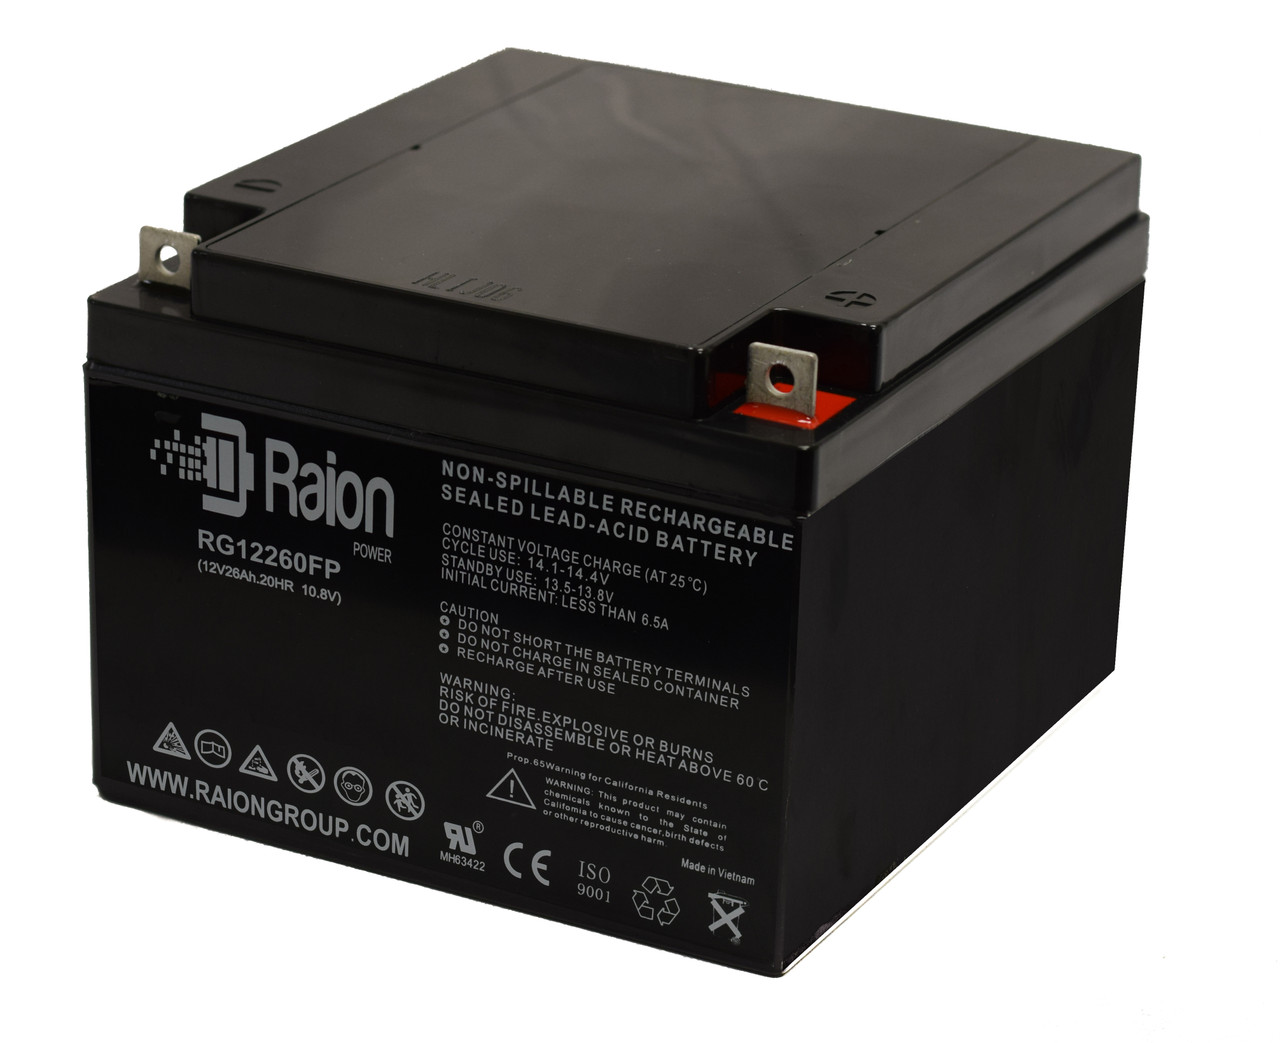 Raion Power Replacement 12V 26Ah Battery for FirstPower FP12280D - 1 Pack